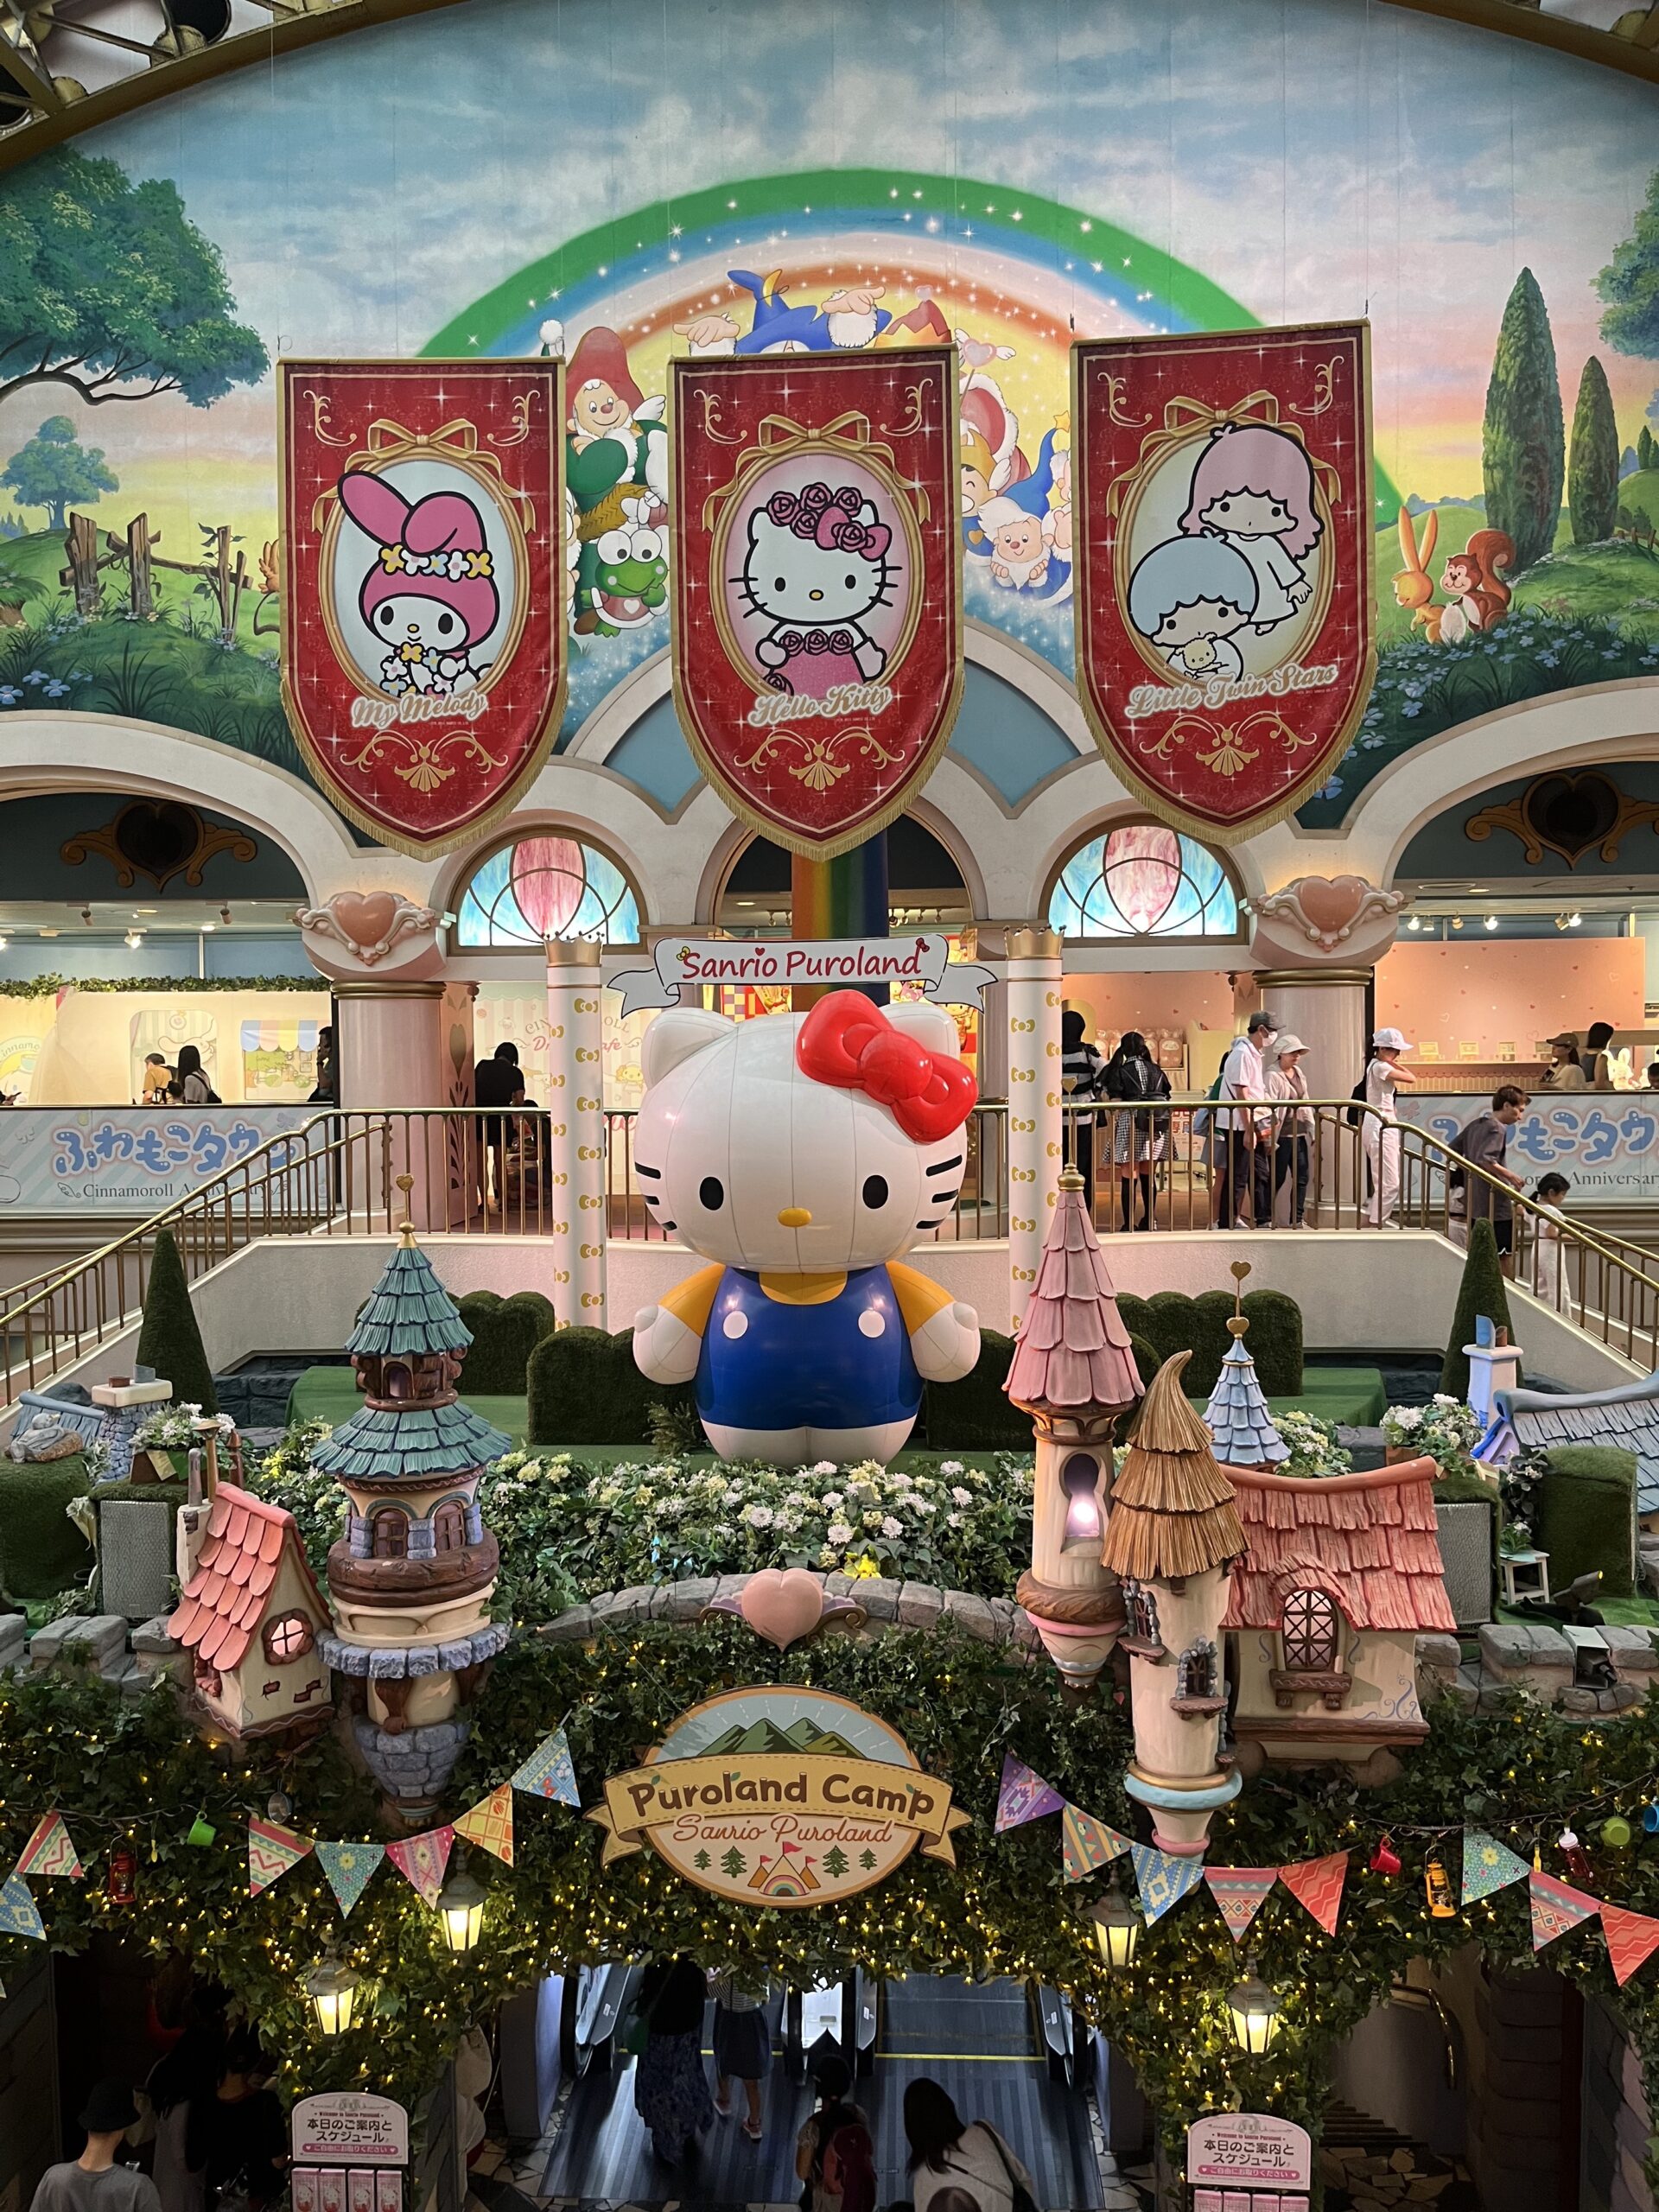 THE ENTRANCE TO SANRIO PUROLAND. NO PHOTO CAN DO JUSTICE TO THIS AMAZING PLACE!